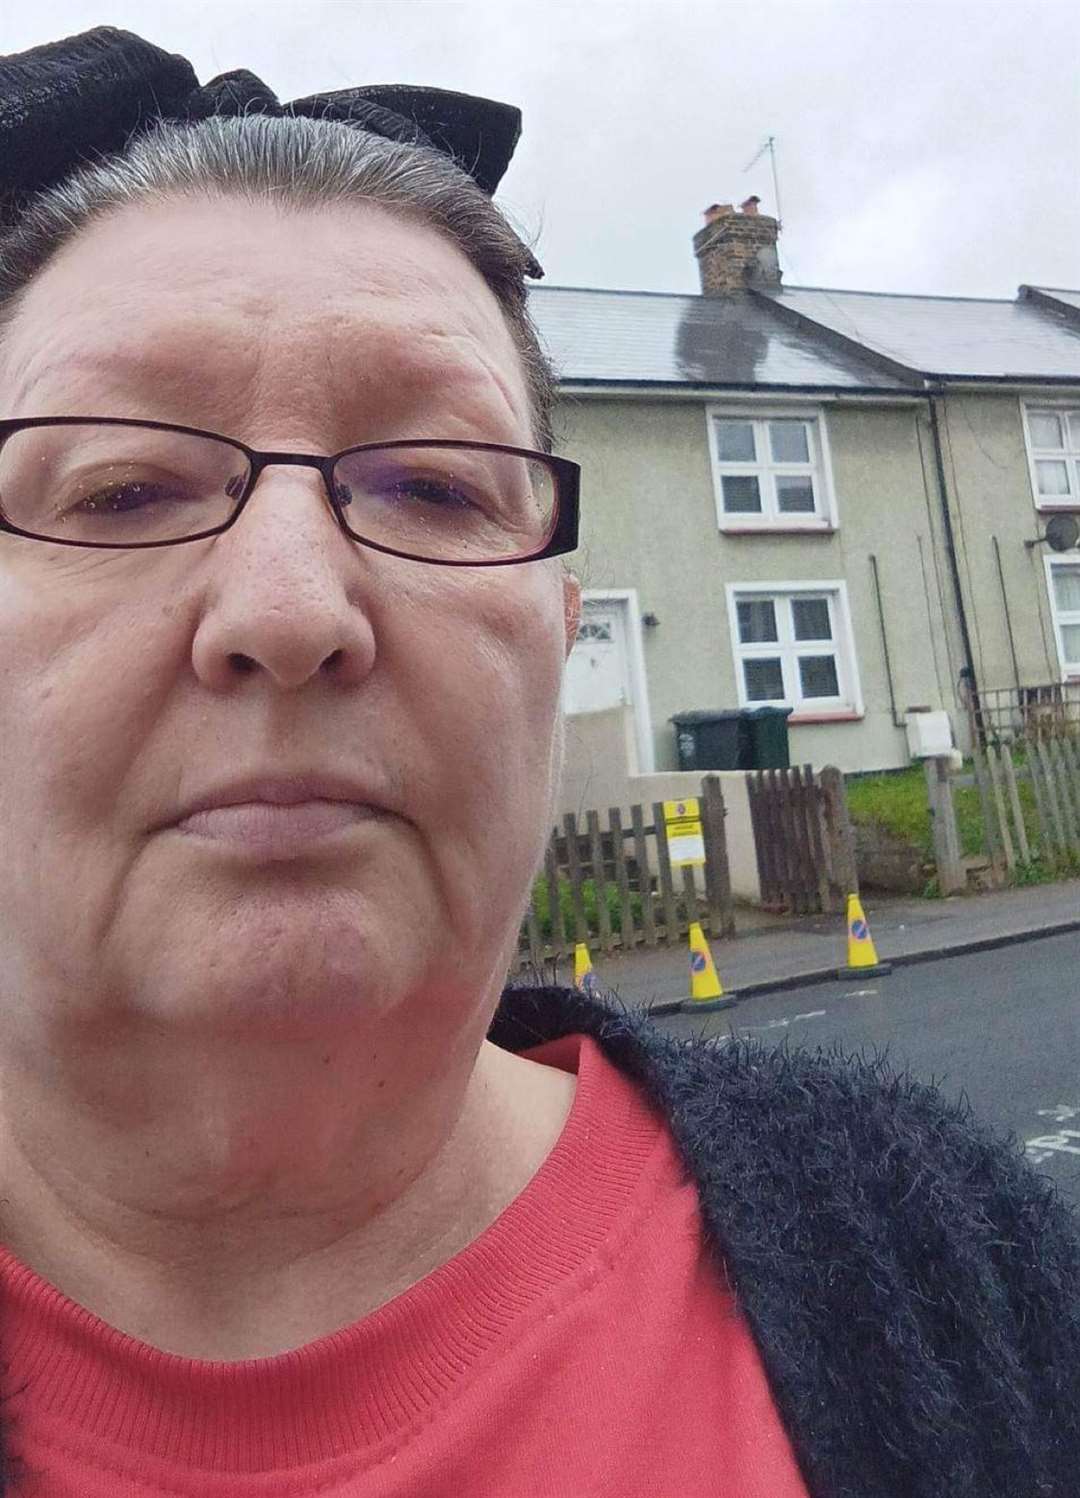 Michele Glass of St Vincent's Road, Dartford was kept awake by the noise of the road resurfacing at midnight